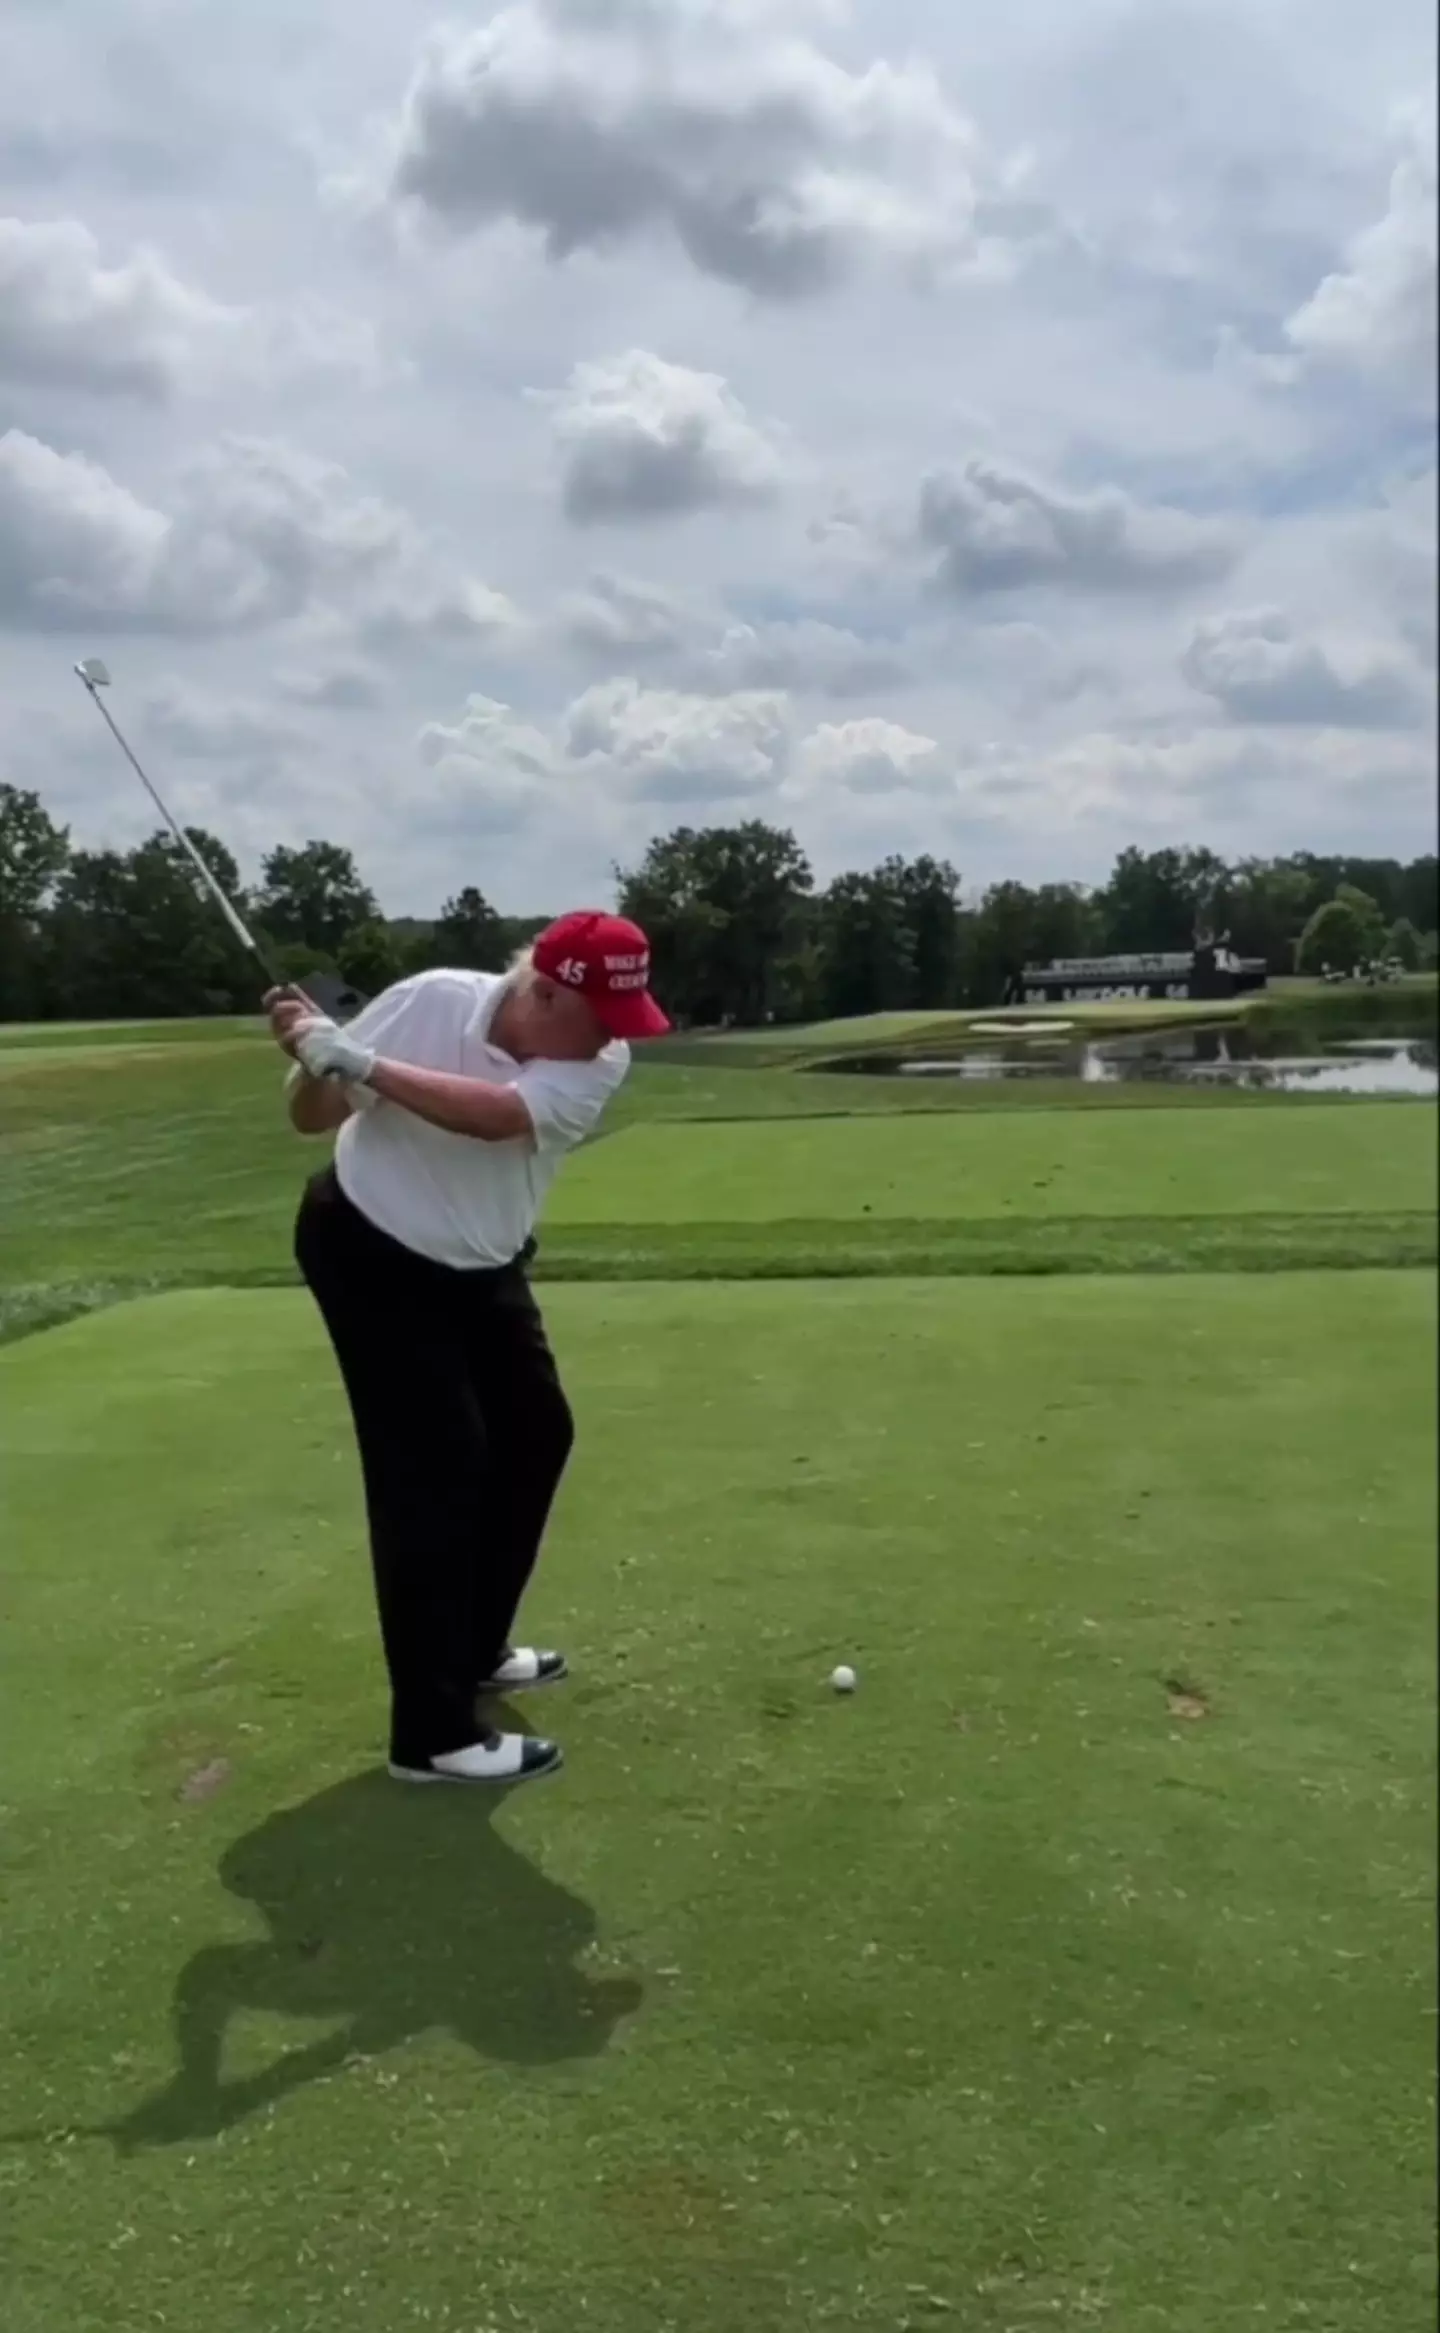 Donald Trump was heckled for his poor swing.